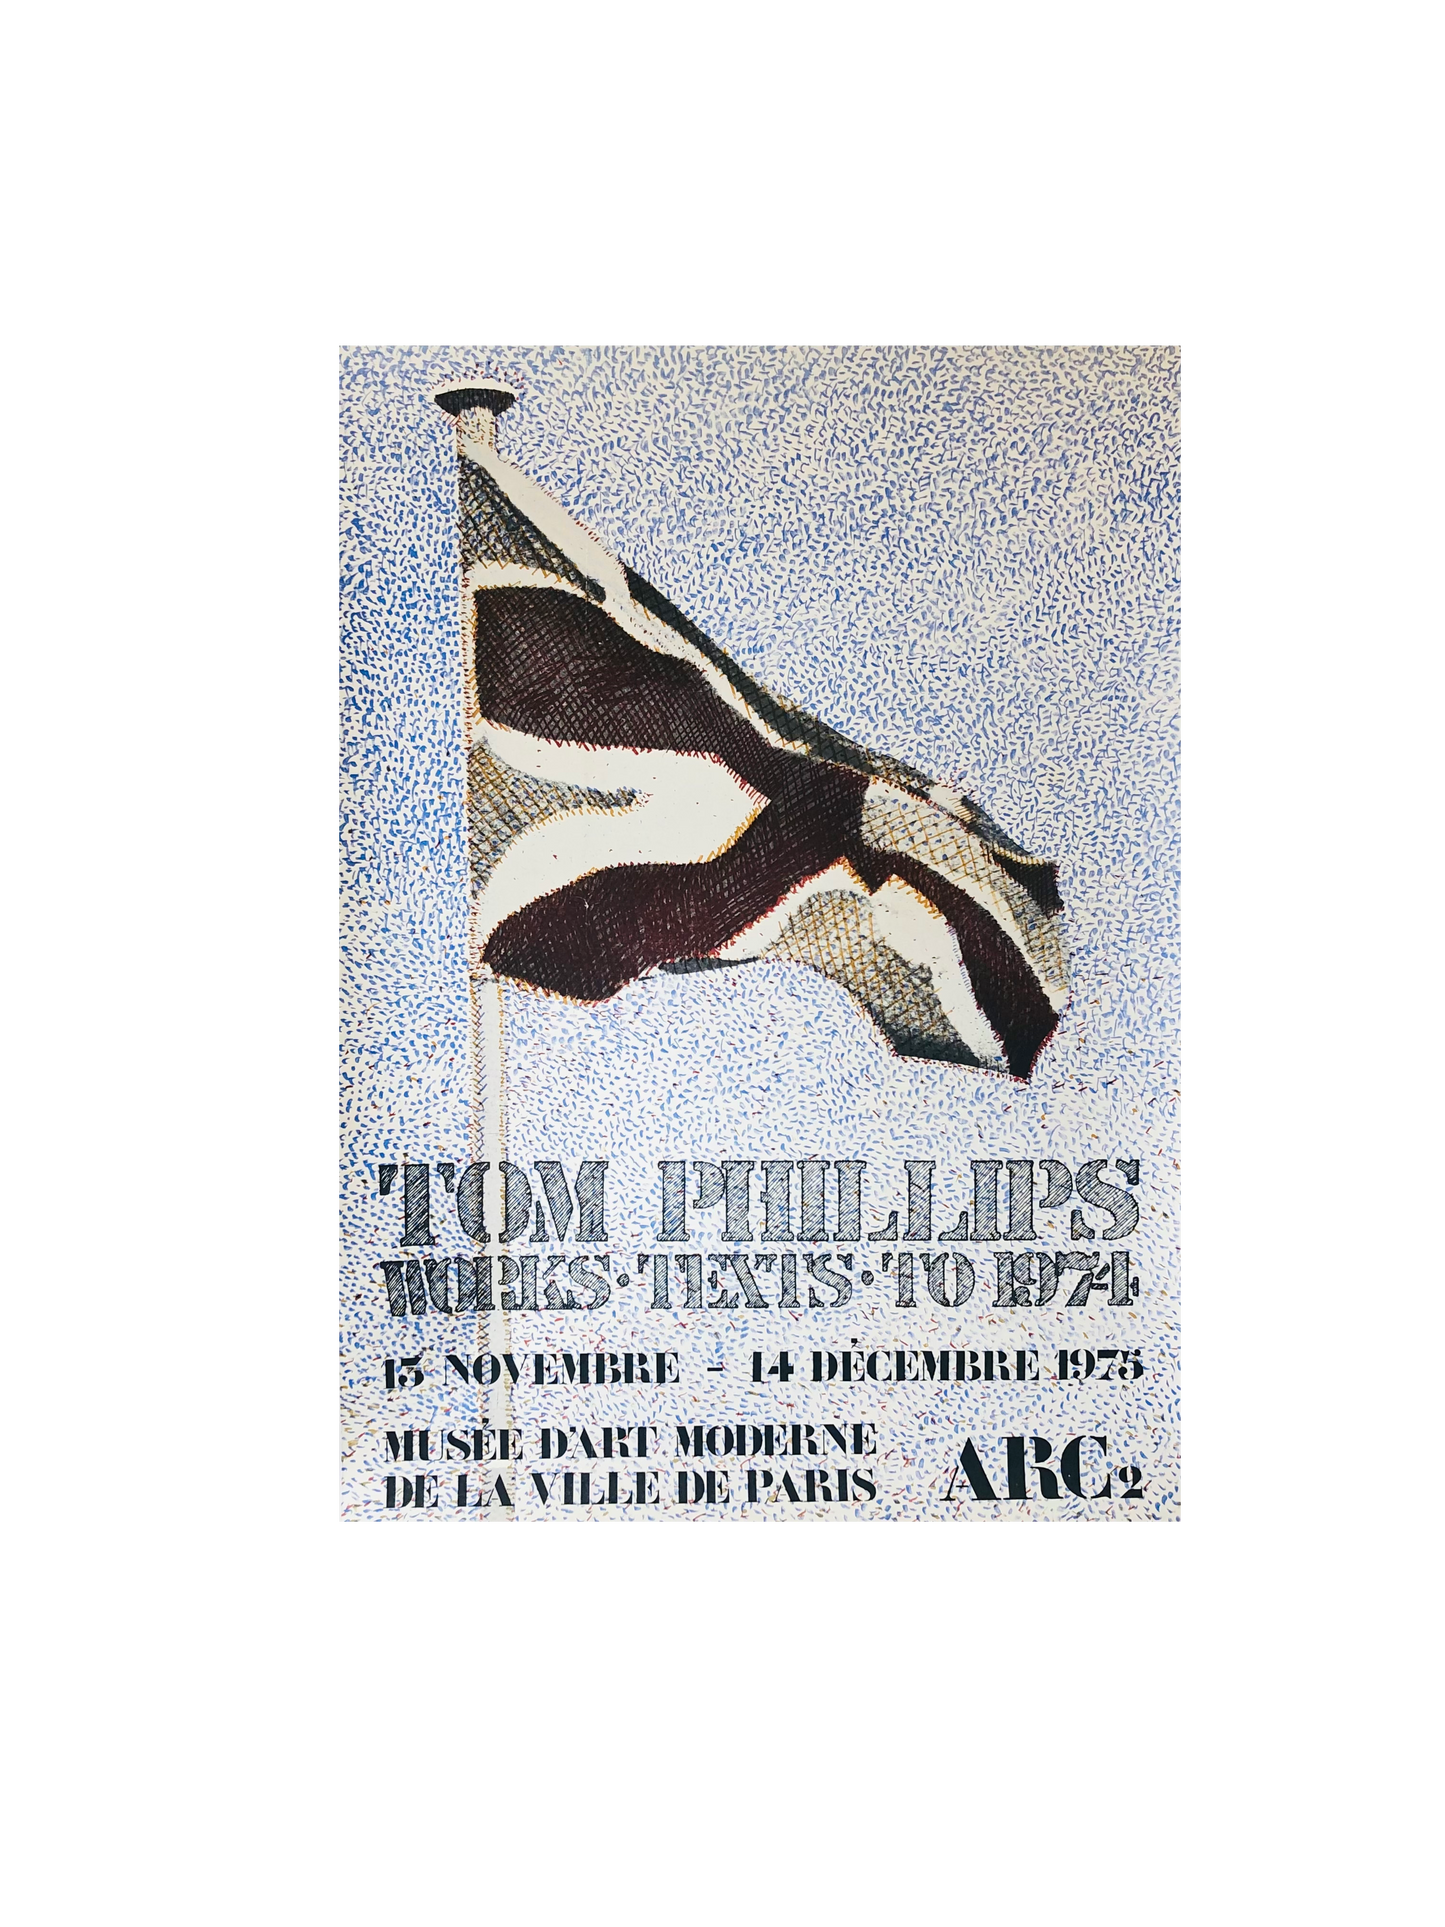 Tom Phillips 1975 Exhibition Poster